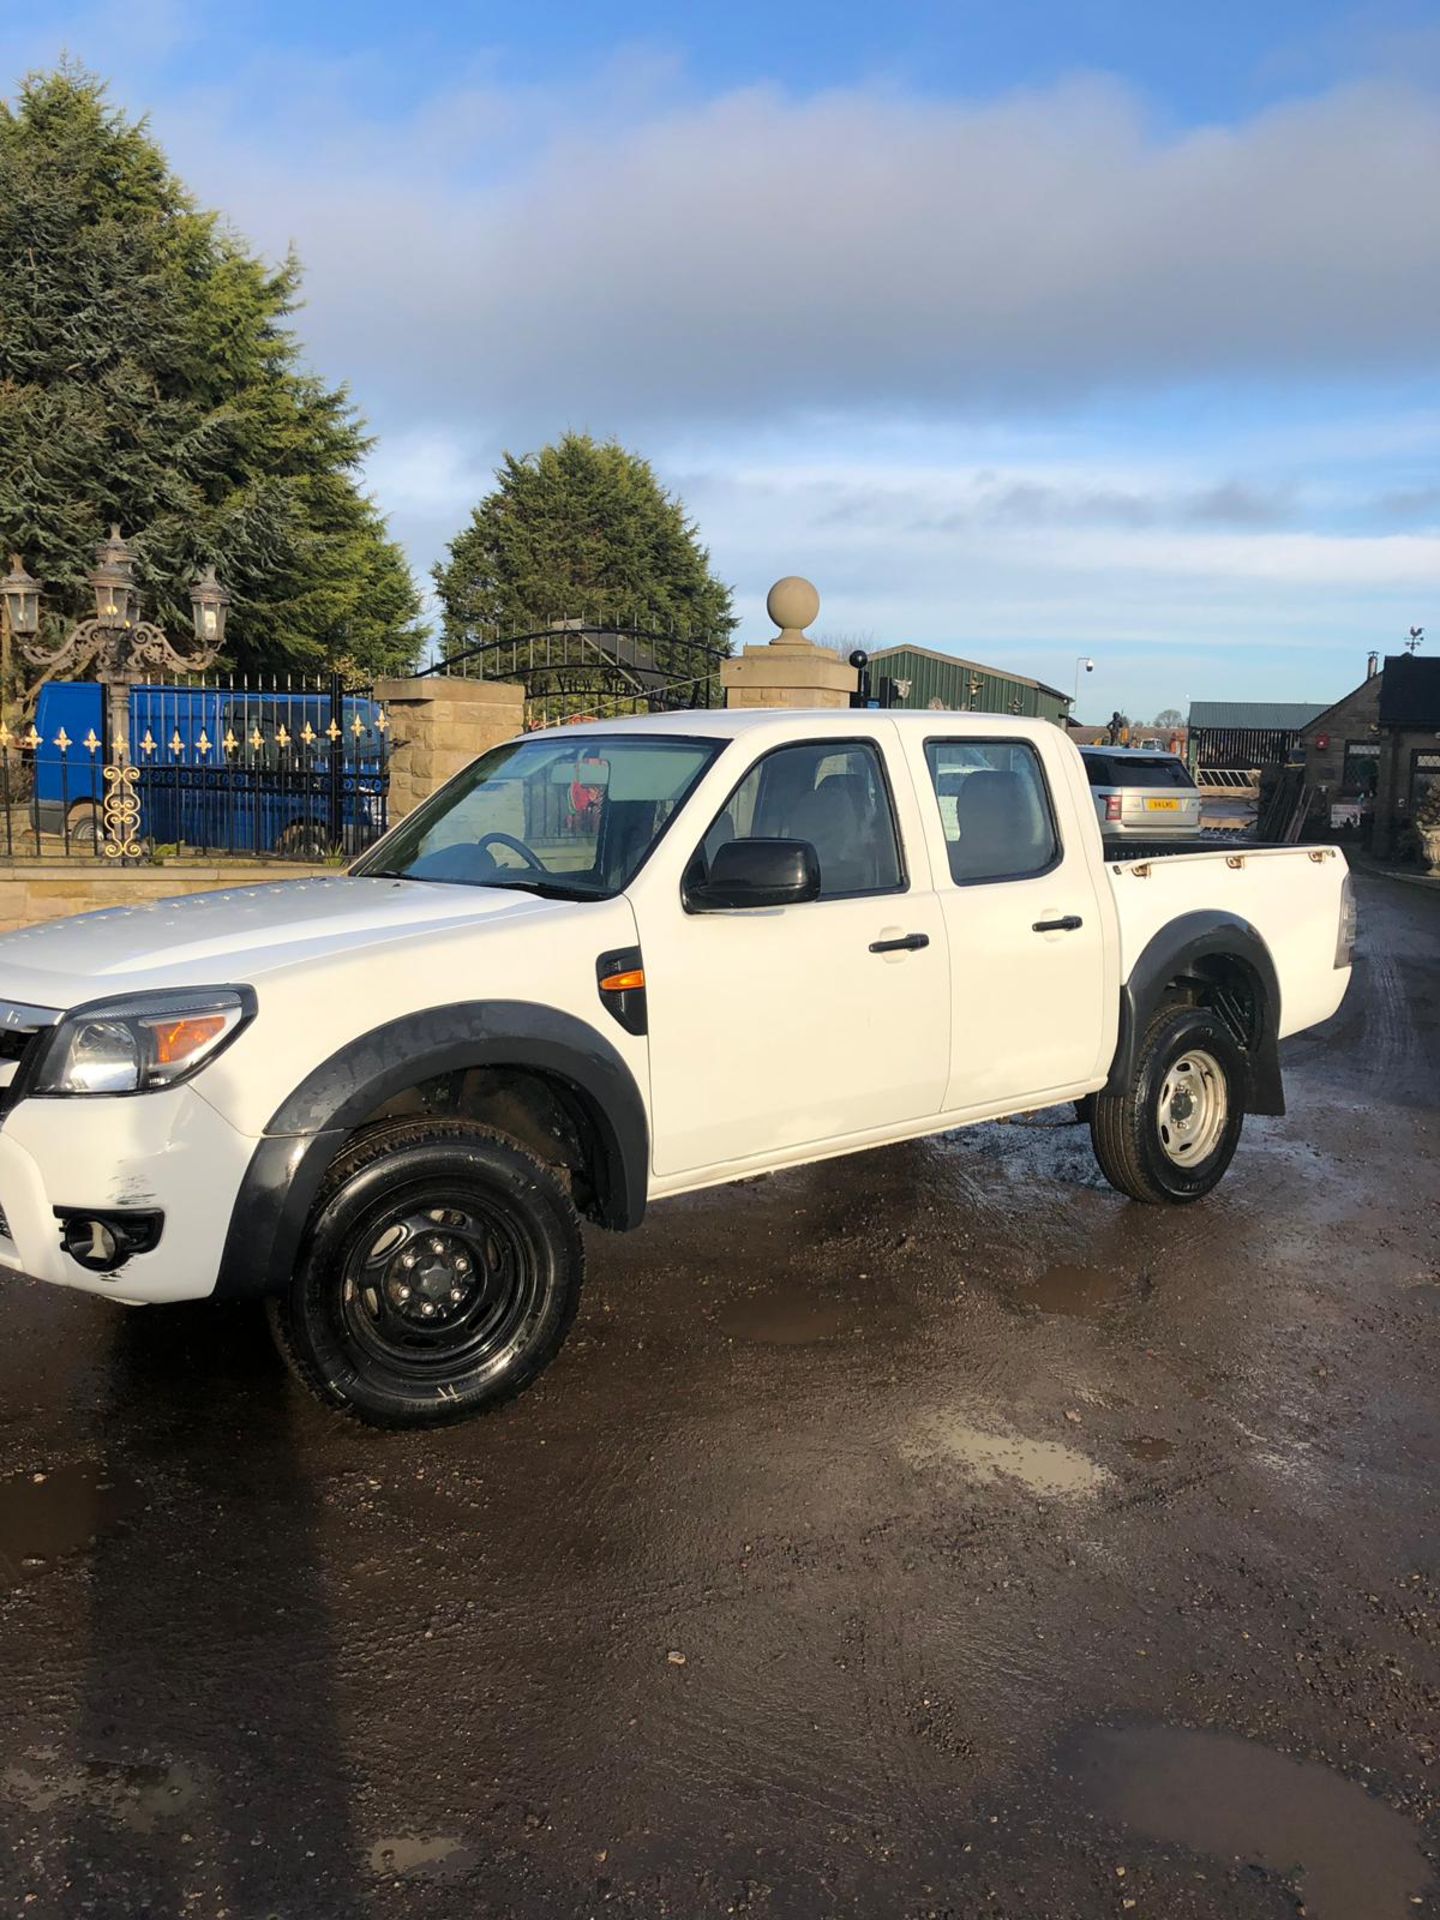 2011/11 REG FORD RANGER XL 4X4 DOUBLE CAB TDCI DIESEL PICK-UP, SHOWING 0 FORMER KEEPERS *NO VAT* - Image 3 of 11